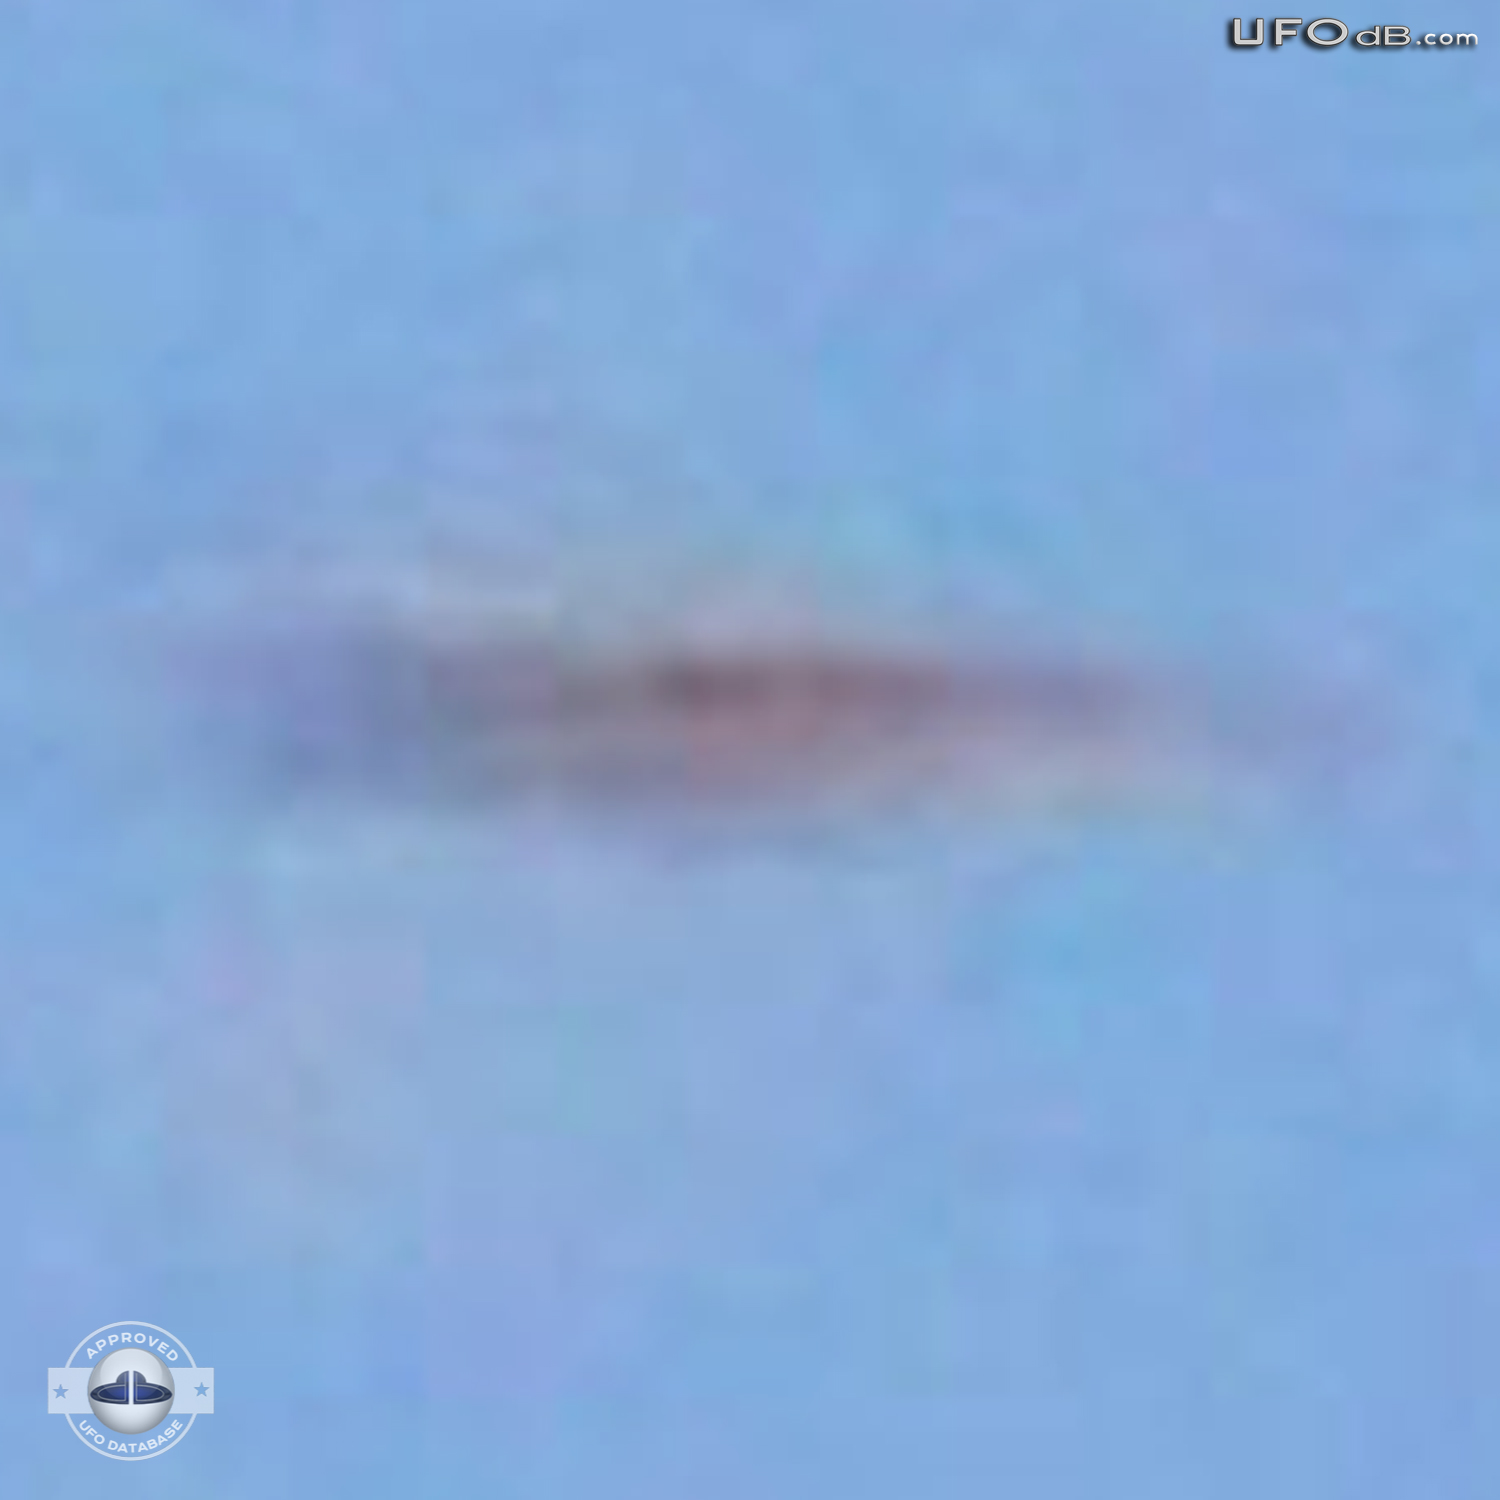 Photo Contest shot capture a passing UFO in Uruguay | May 18 2011 UFO Picture #329-5